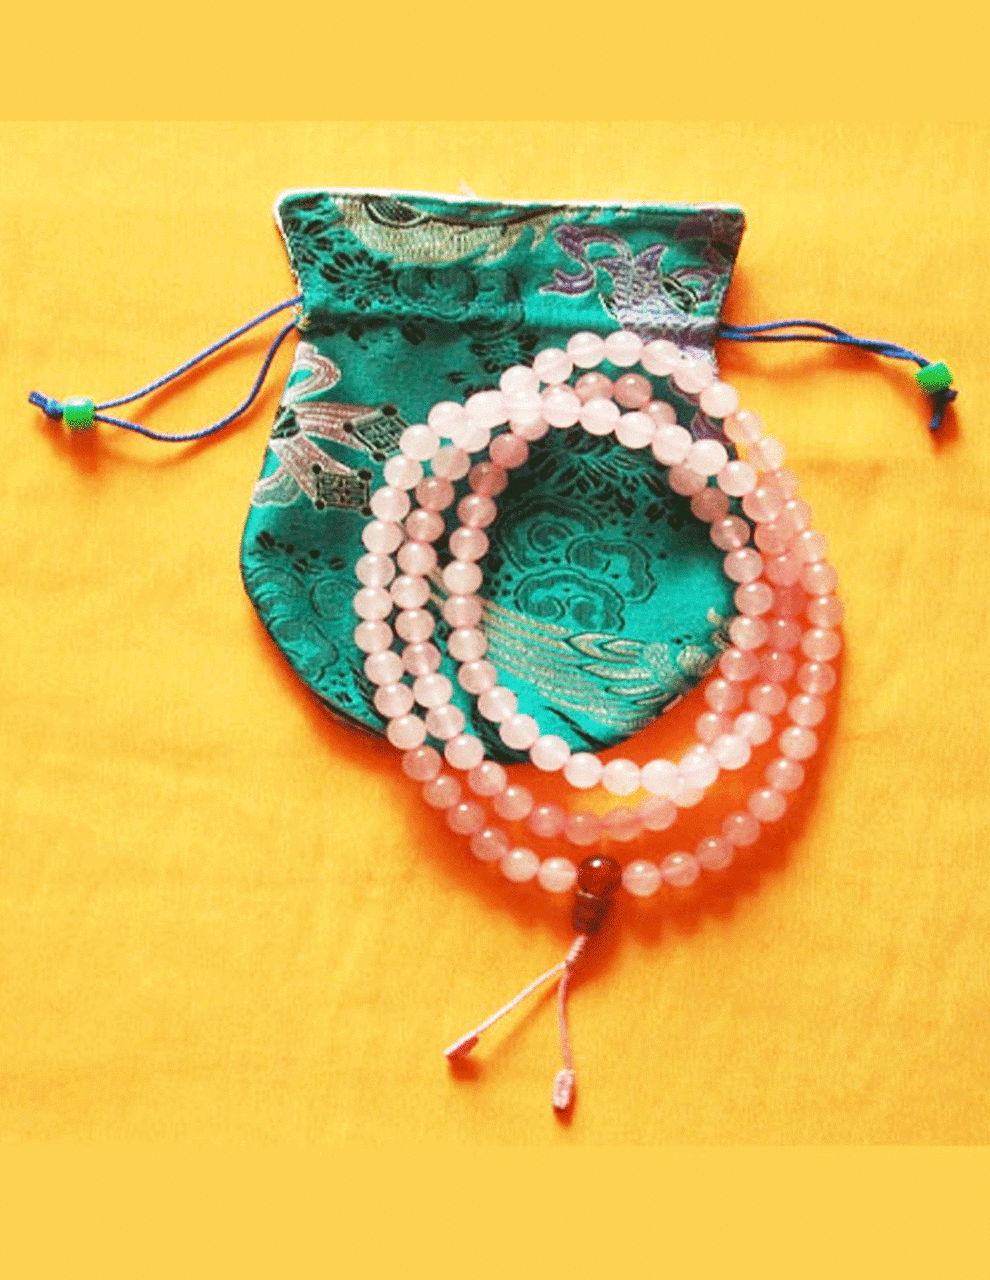 Authentic Tibetan Blue Clay Bead Necklace Handmade Ethnic Jewelry from  Nepal – Cultural Elements, Blue Clay Beads - valleyresorts.co.uk